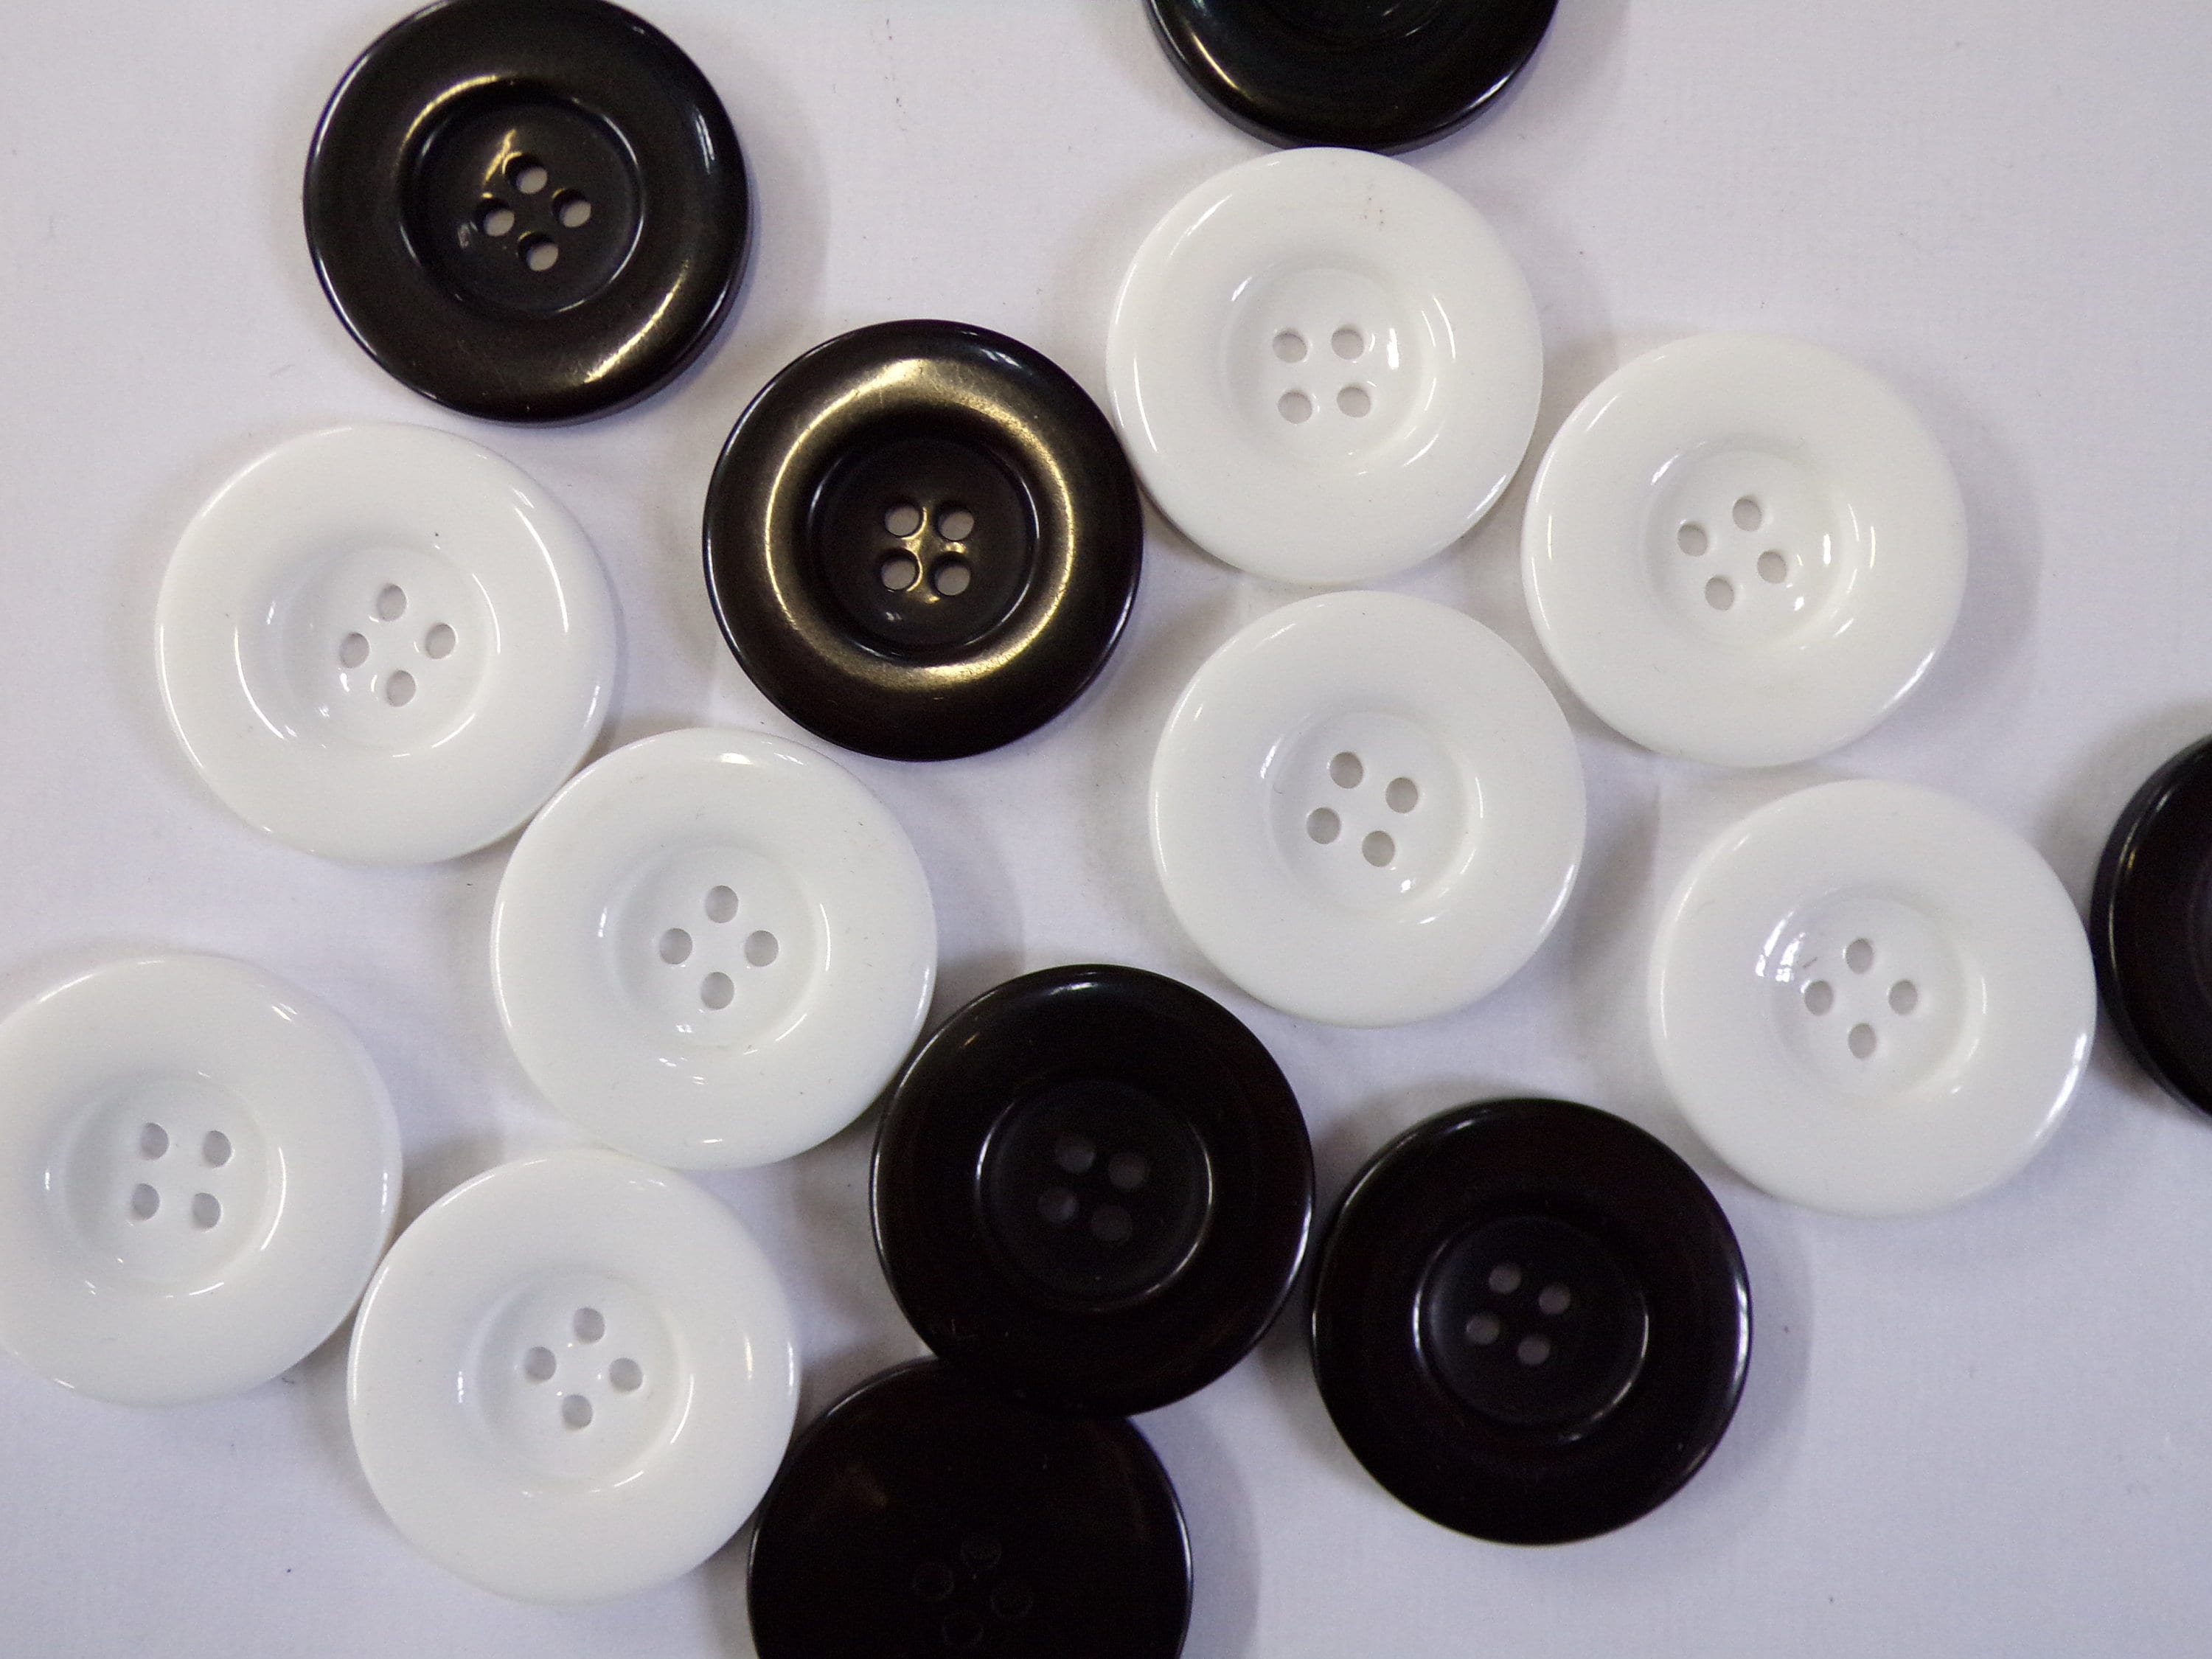 Matte White Buttons, Bowl Shaped, Four Holes, No Shine, for Sewing Blouse  Shirt, 11.5mm,10mm, 0.43inch, 0.45inch, Solid Color, Round Shape 